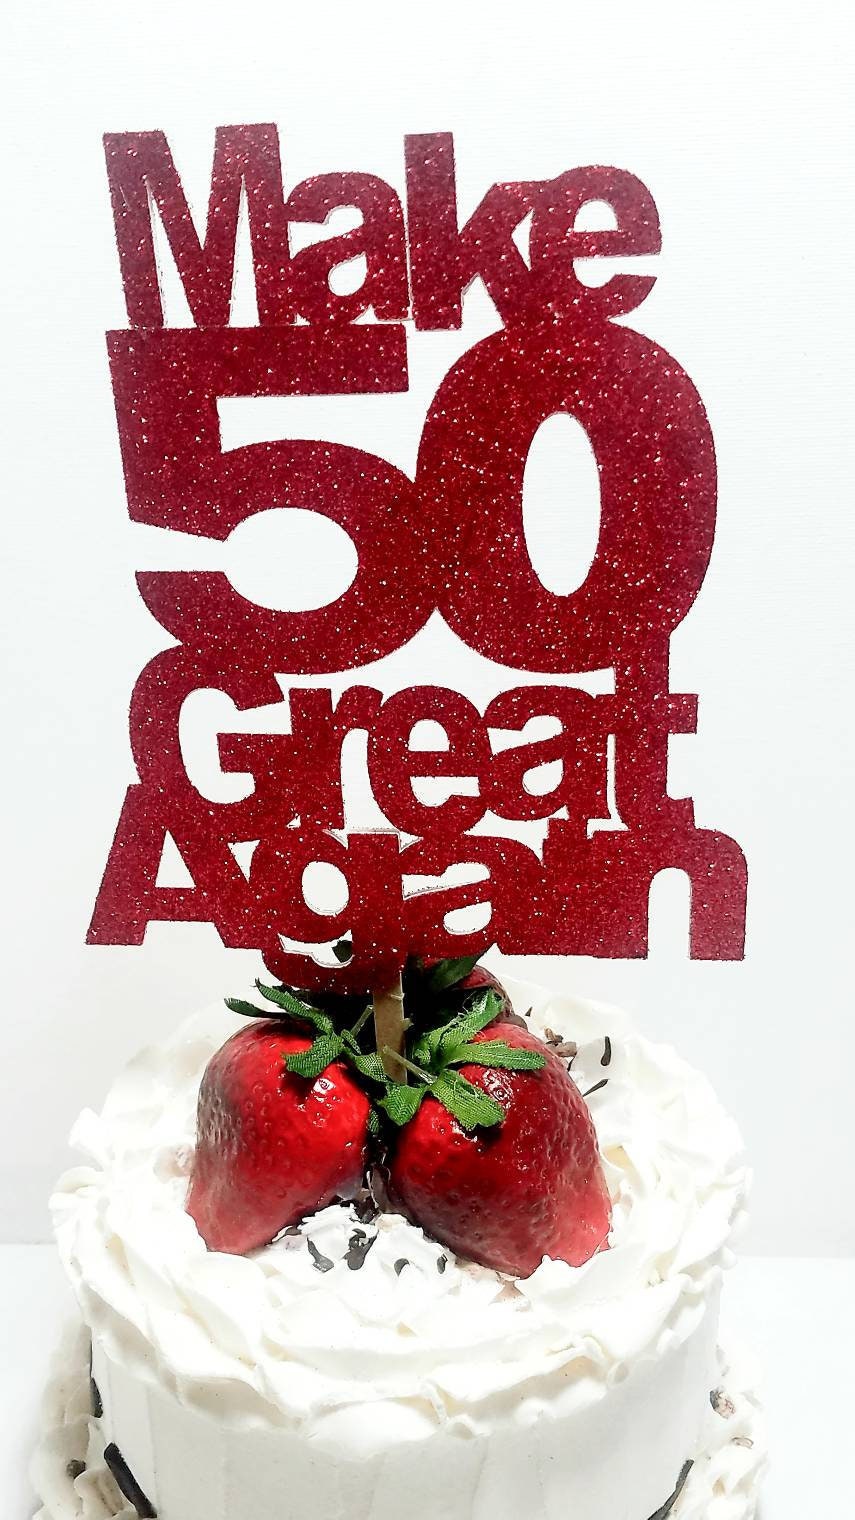 50 Birthday Cake Topper 50 and Fabulous GOLD Fun 50th Birthday Party  Decorations Ideas Fifty Number 50 Cake Topper 